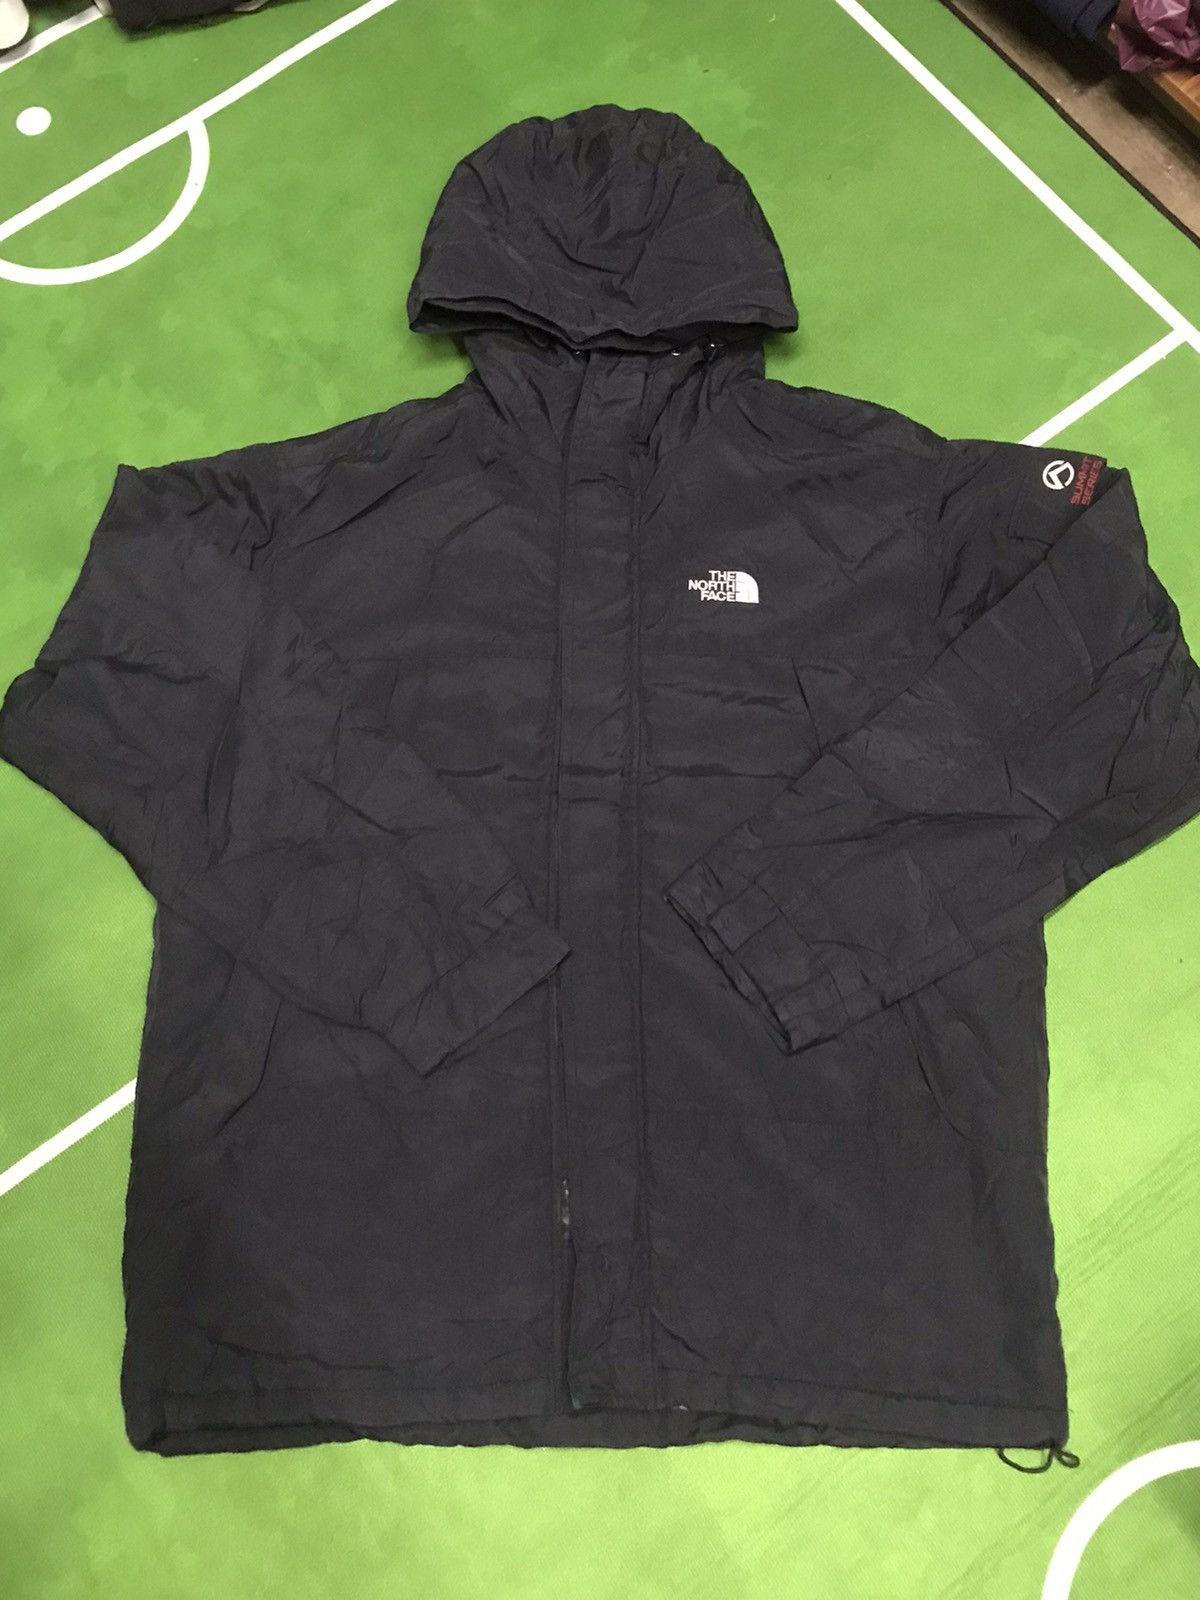 Vintage The North Face Jackets | Grailed